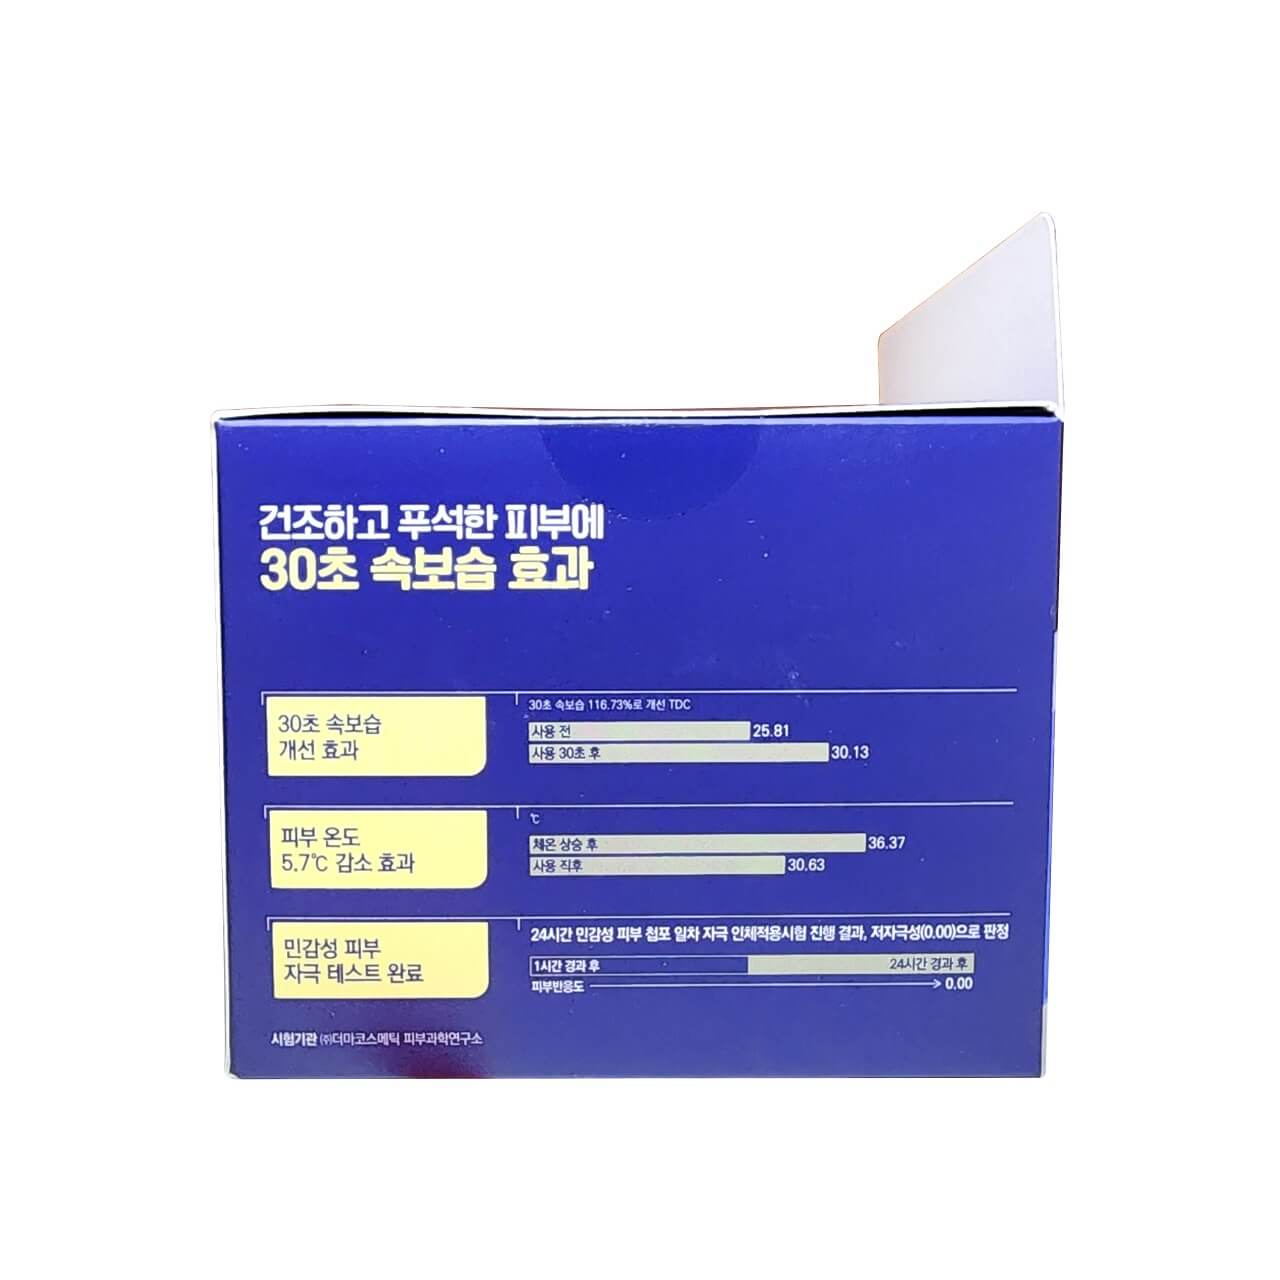 Features for Mediheal Watermide Moisture Pad (100 count)